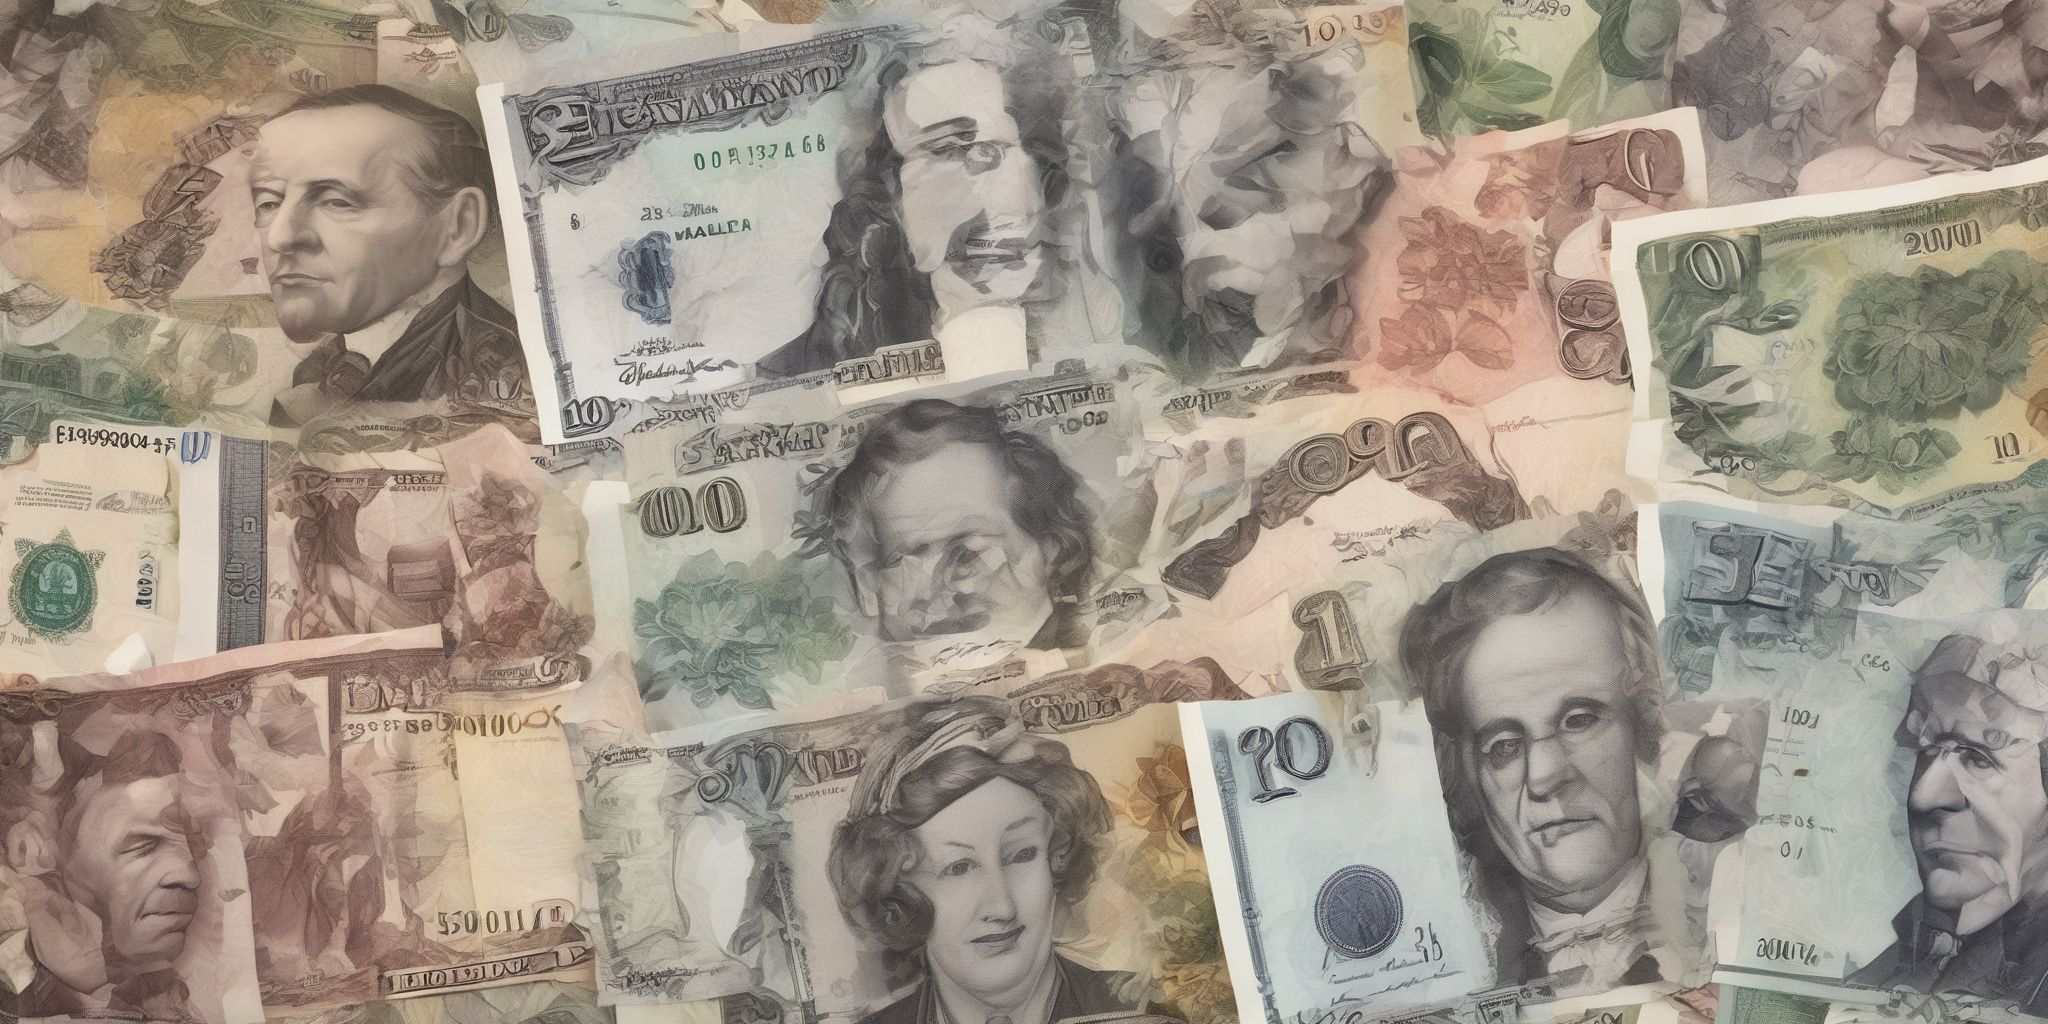 Banknotes  in realistic, photographic style